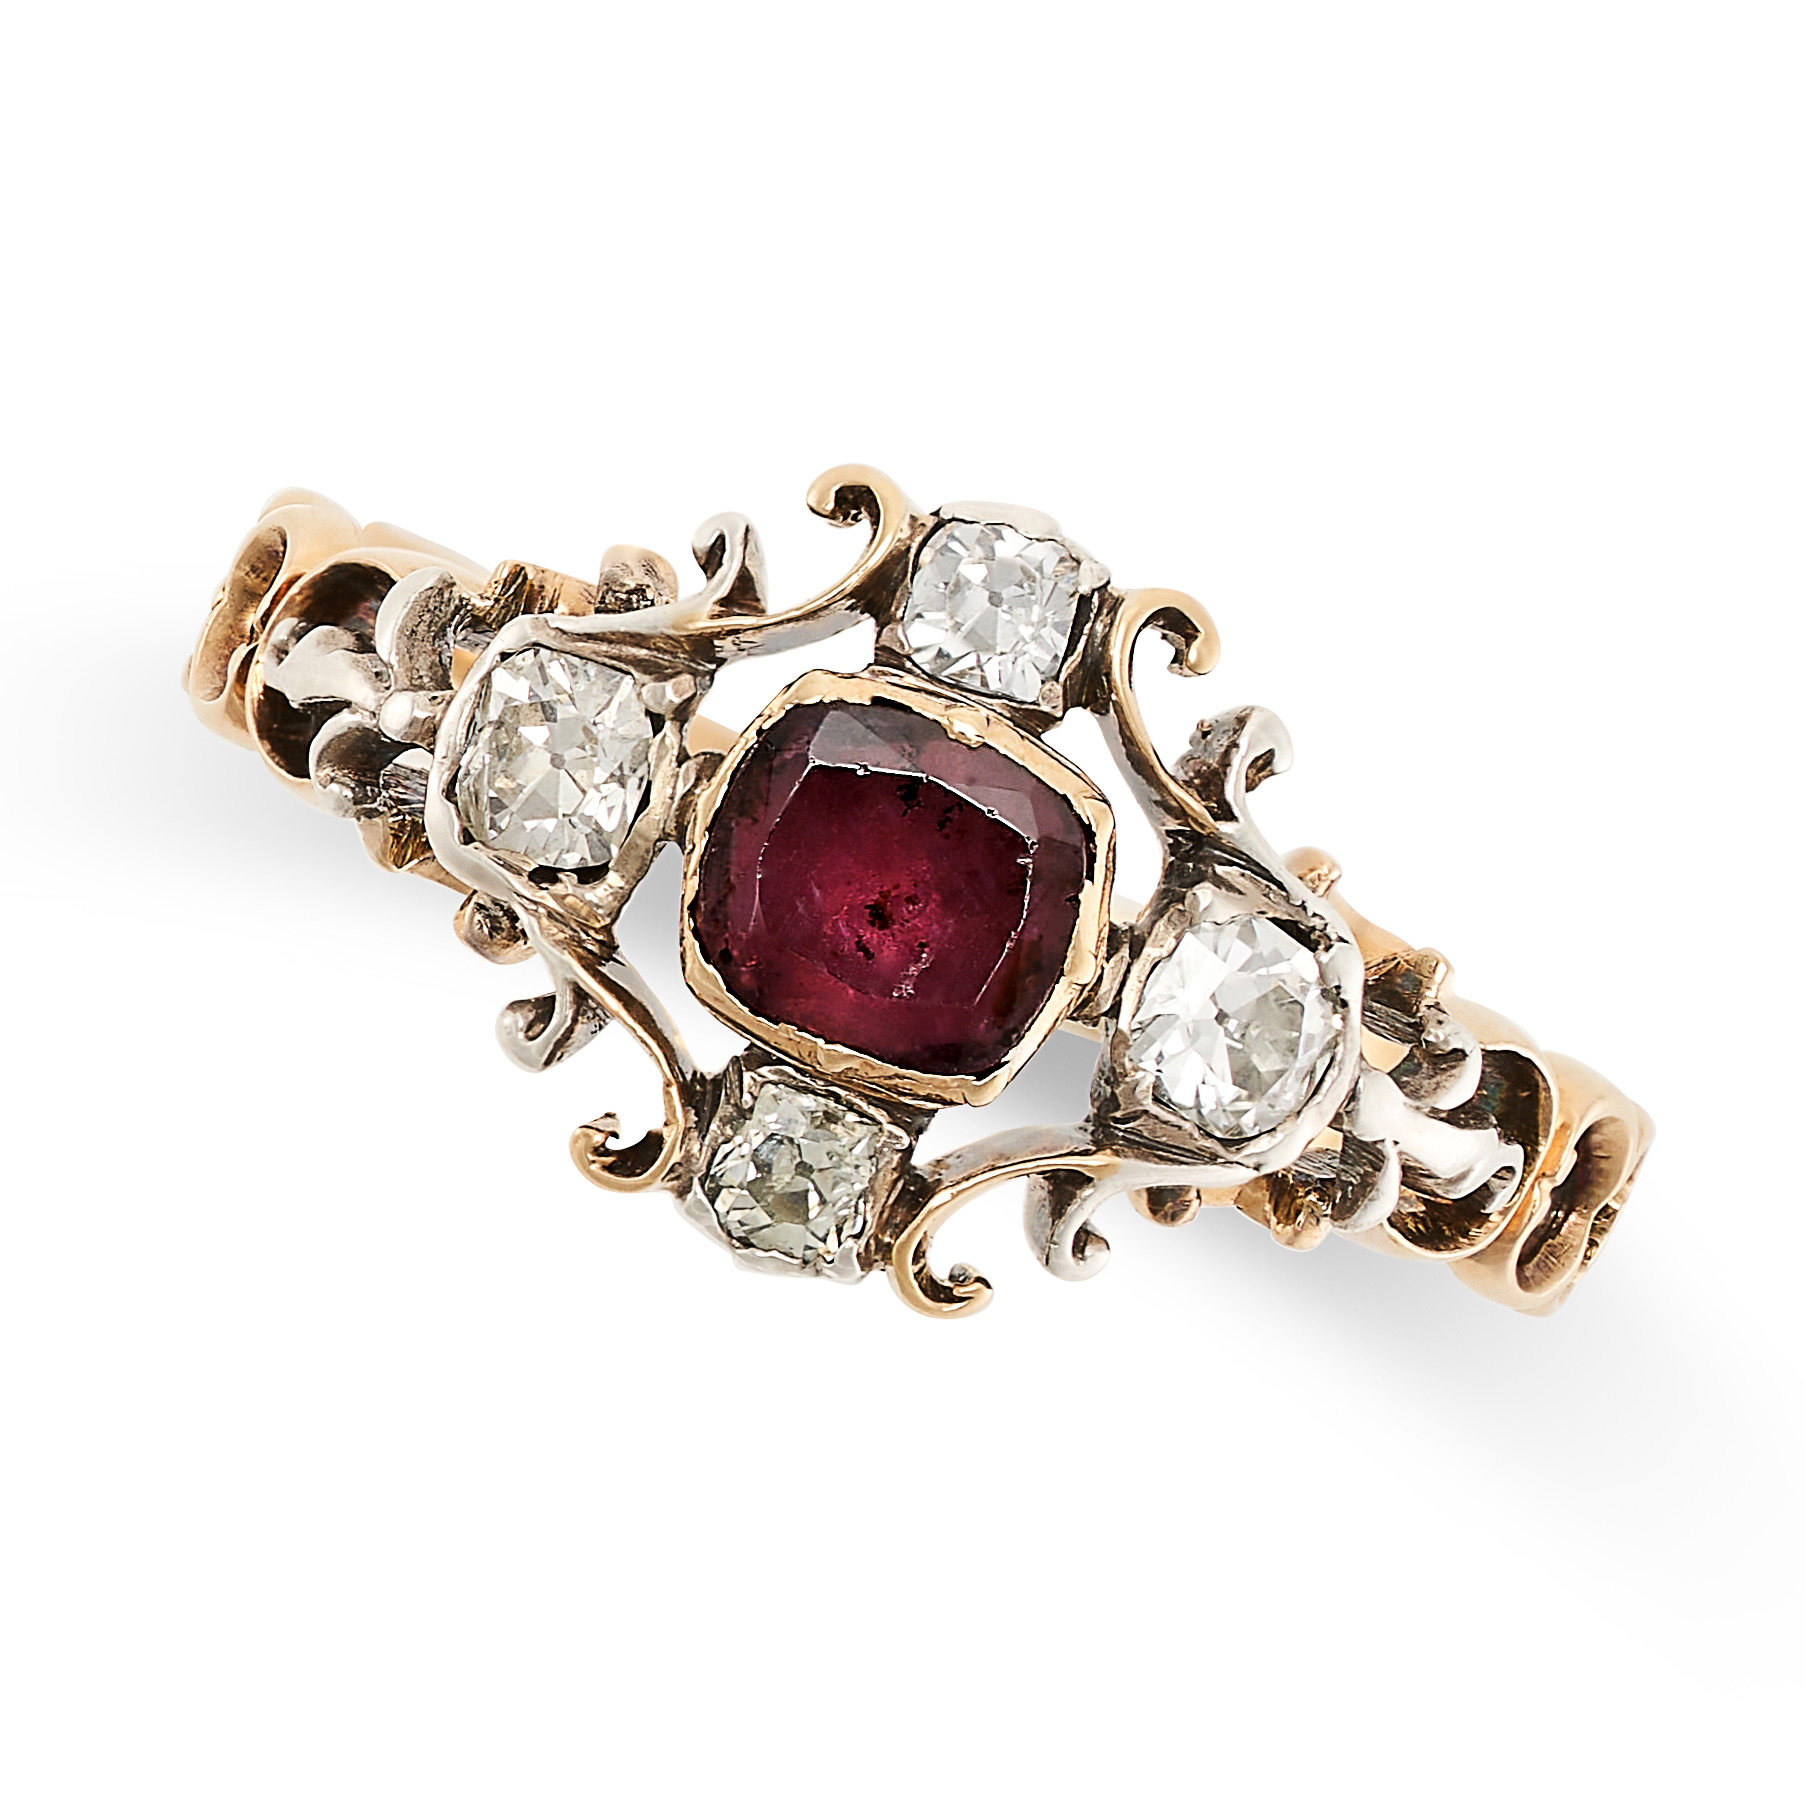 AN ANTIQUE GARNET AND DIAMOND RING, EARLY 19TH CENTURY in yellow gold and silver, set with a cushion